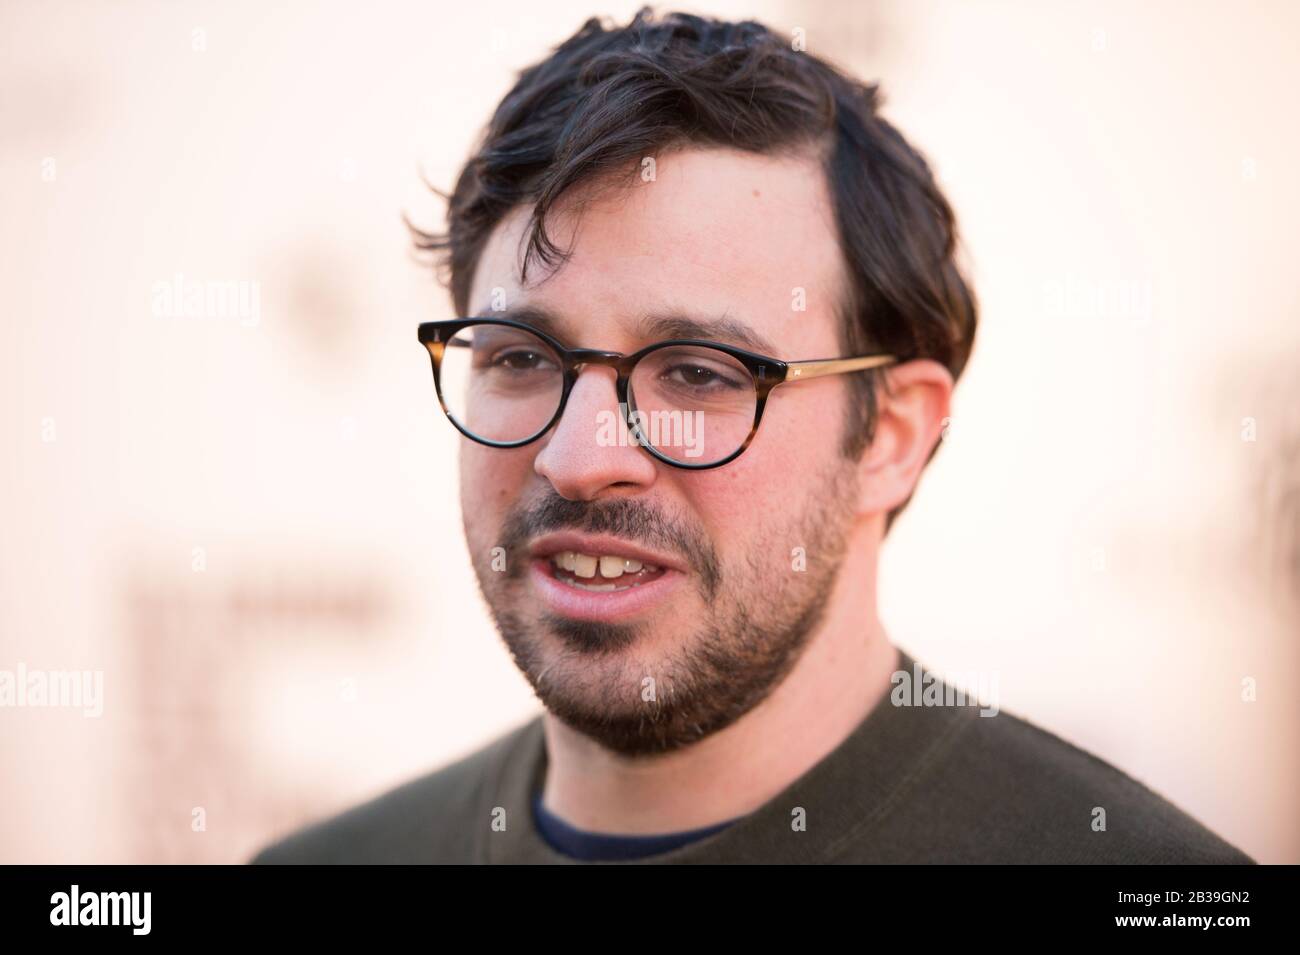 Glasgow, UK. 4th Mar, 2020. Pictured: Simon Bird - Actor. Scottish Premiere of the film, Days of the Bagnold Summer, on the red carpet of the Glasgow Film Theatre at the Glasgow Film Festival 2020. Credit: Colin Fisher/Alamy Live News Stock Photo